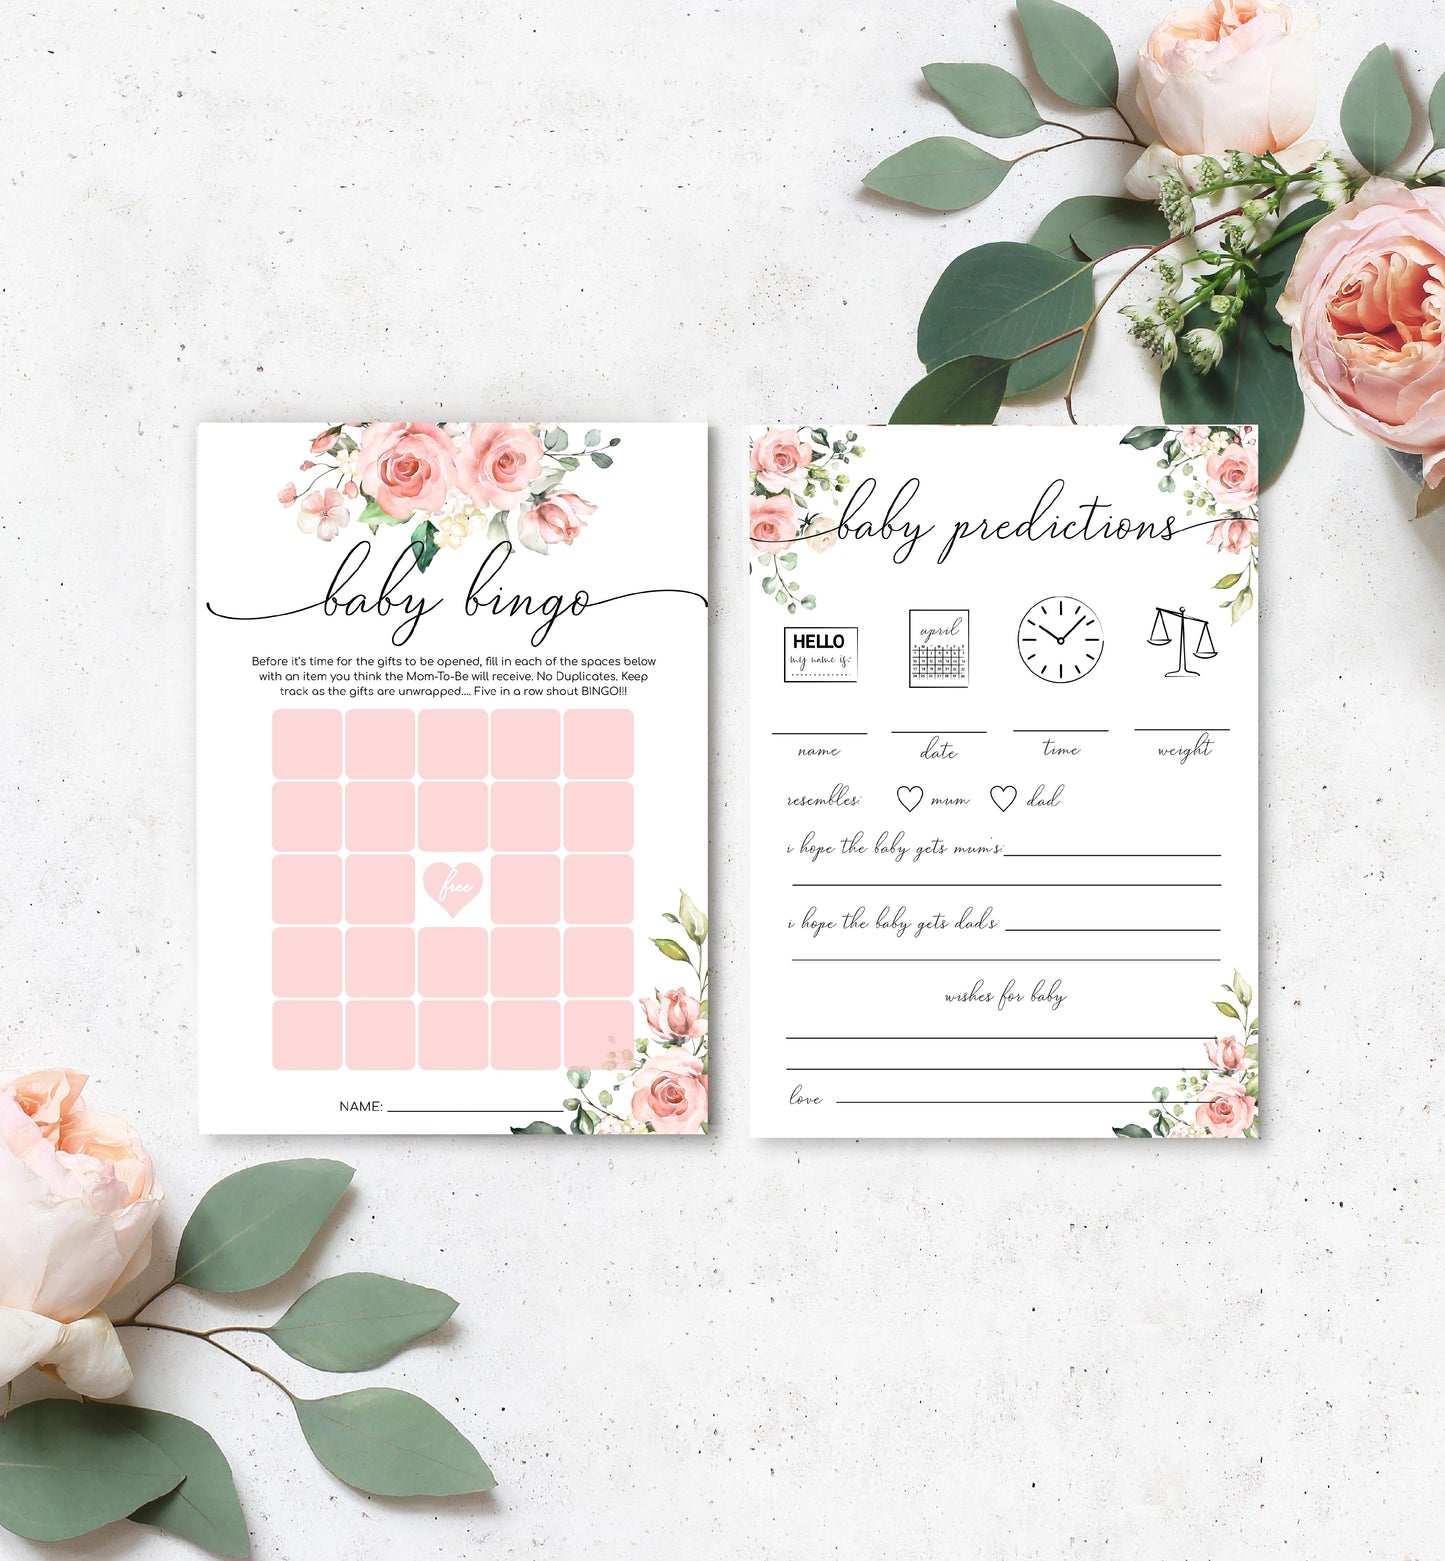 Printable Editable Baby Shower Games Bundle - Blush Floral Words of Advice and Family Traditions - Darcy Floral - Girl Baby Shower